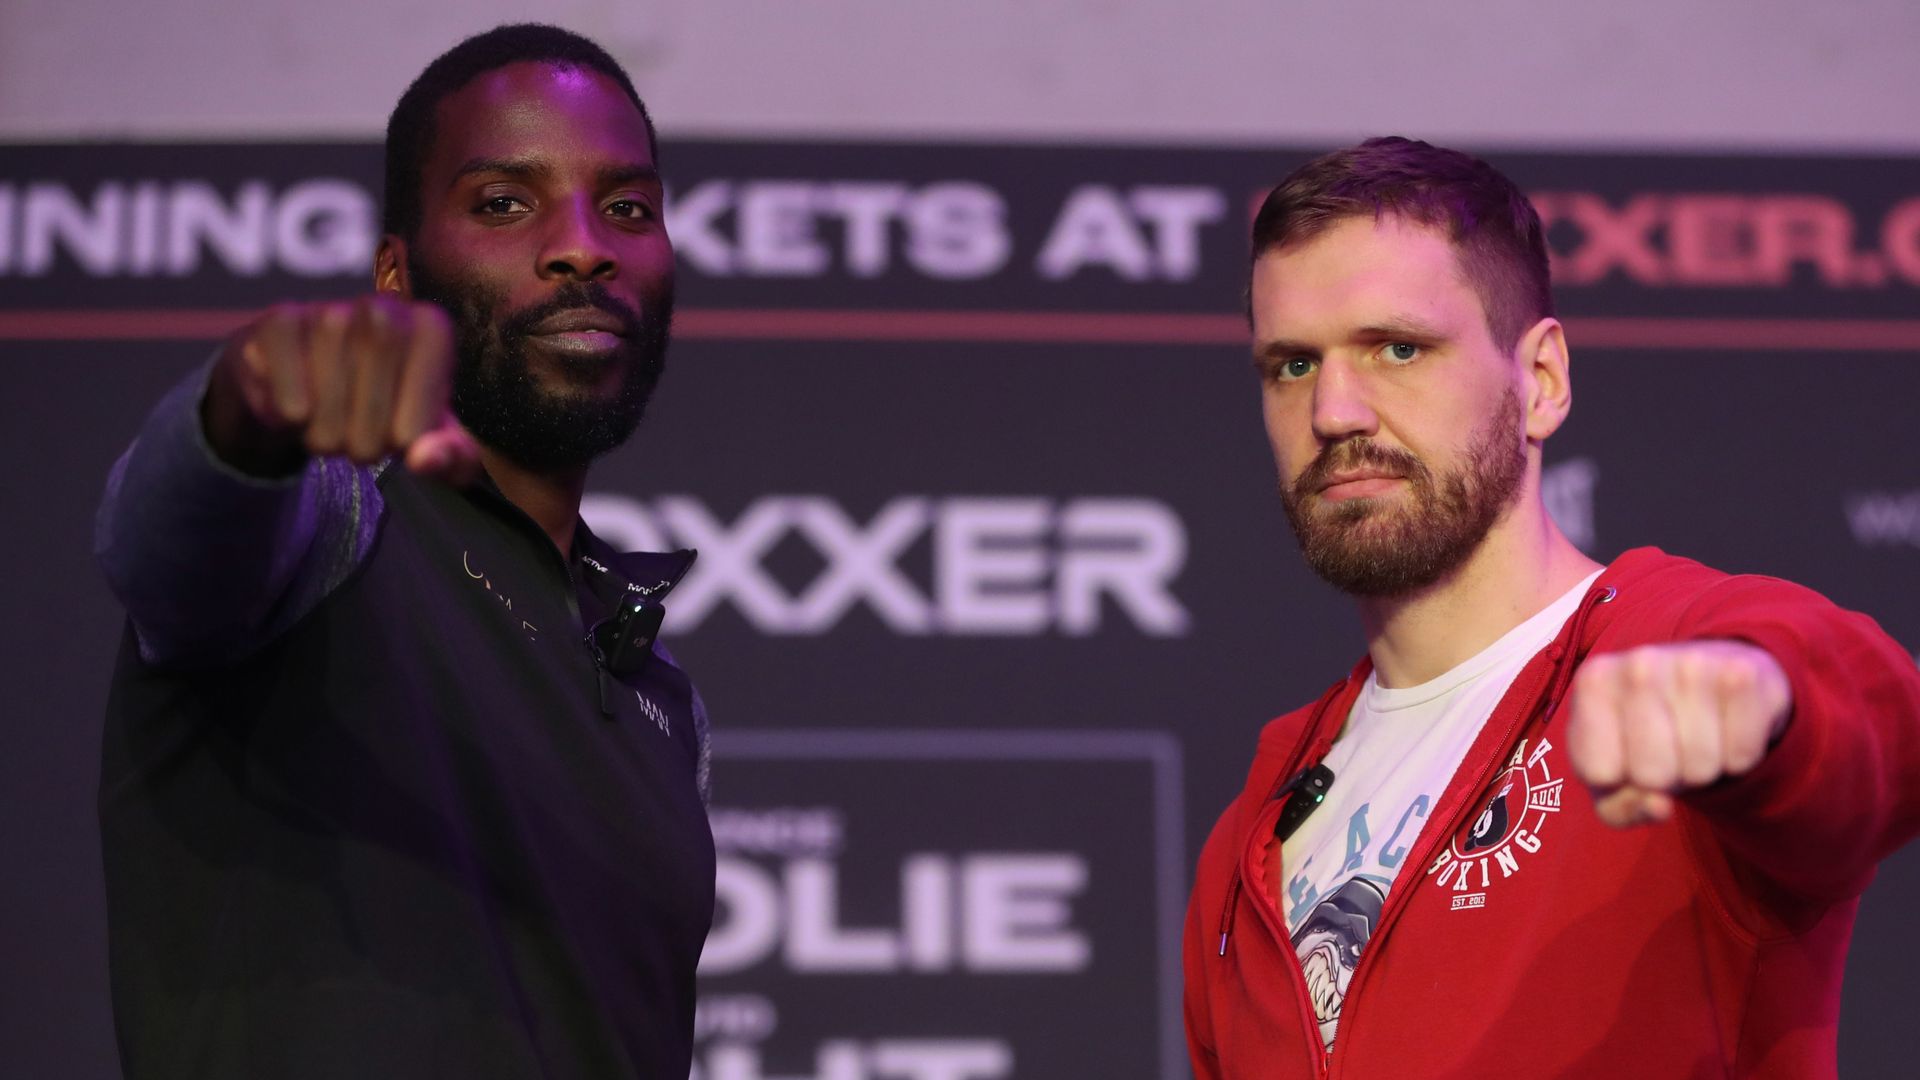 Okolie & Light face off: 'One of us will become irrelevant'